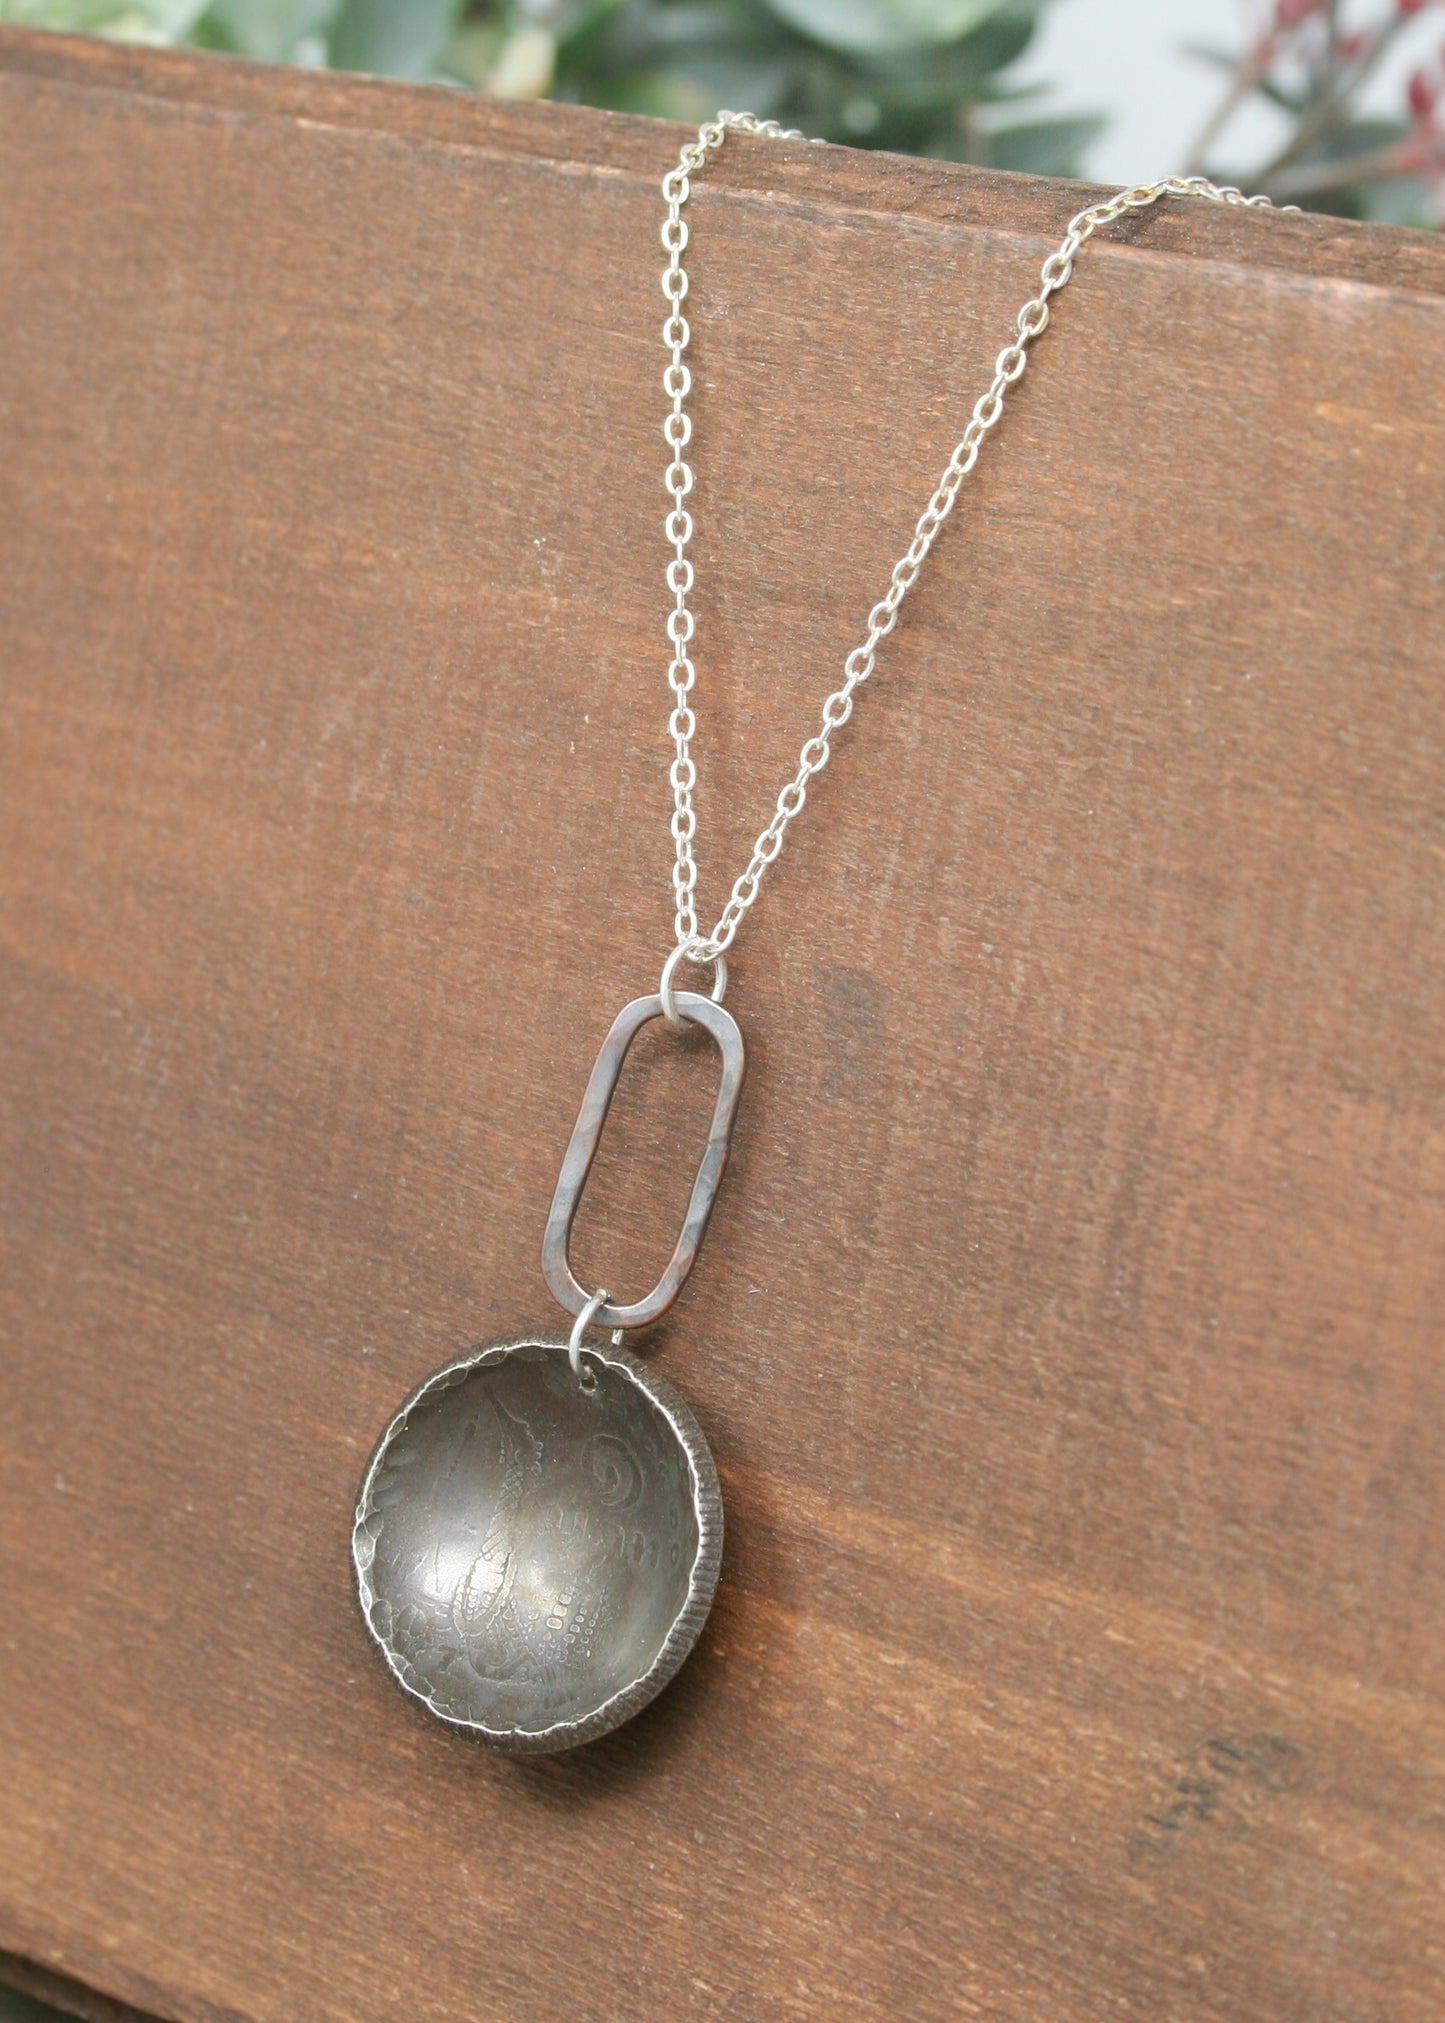 a silver necklace with a small metal object hanging from it